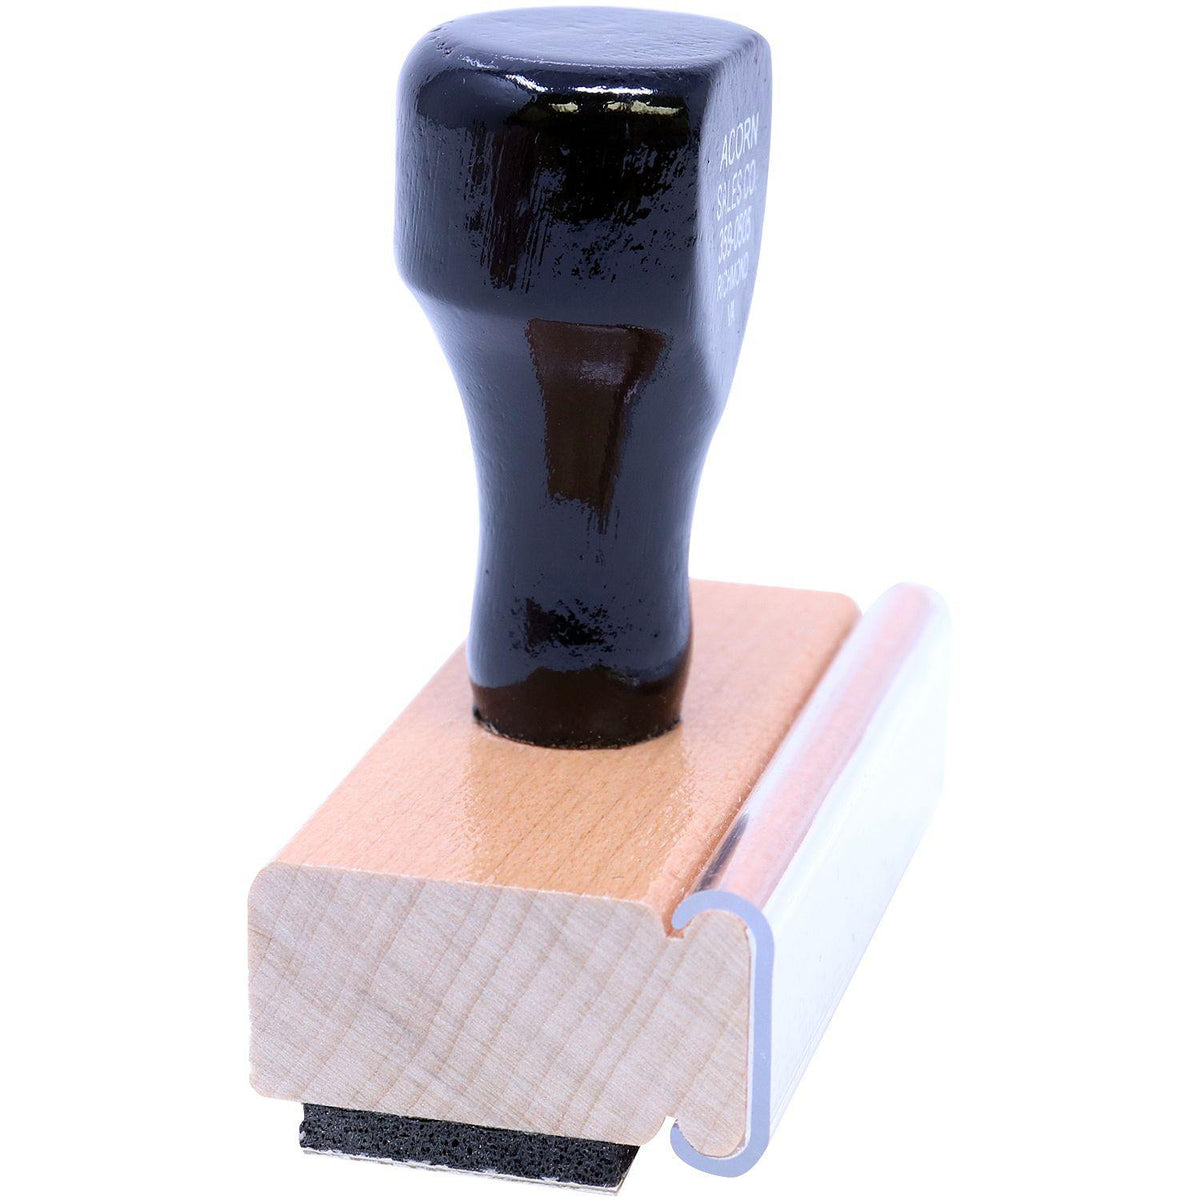 Side View of Faxed on Rubber Stamp at an Angle